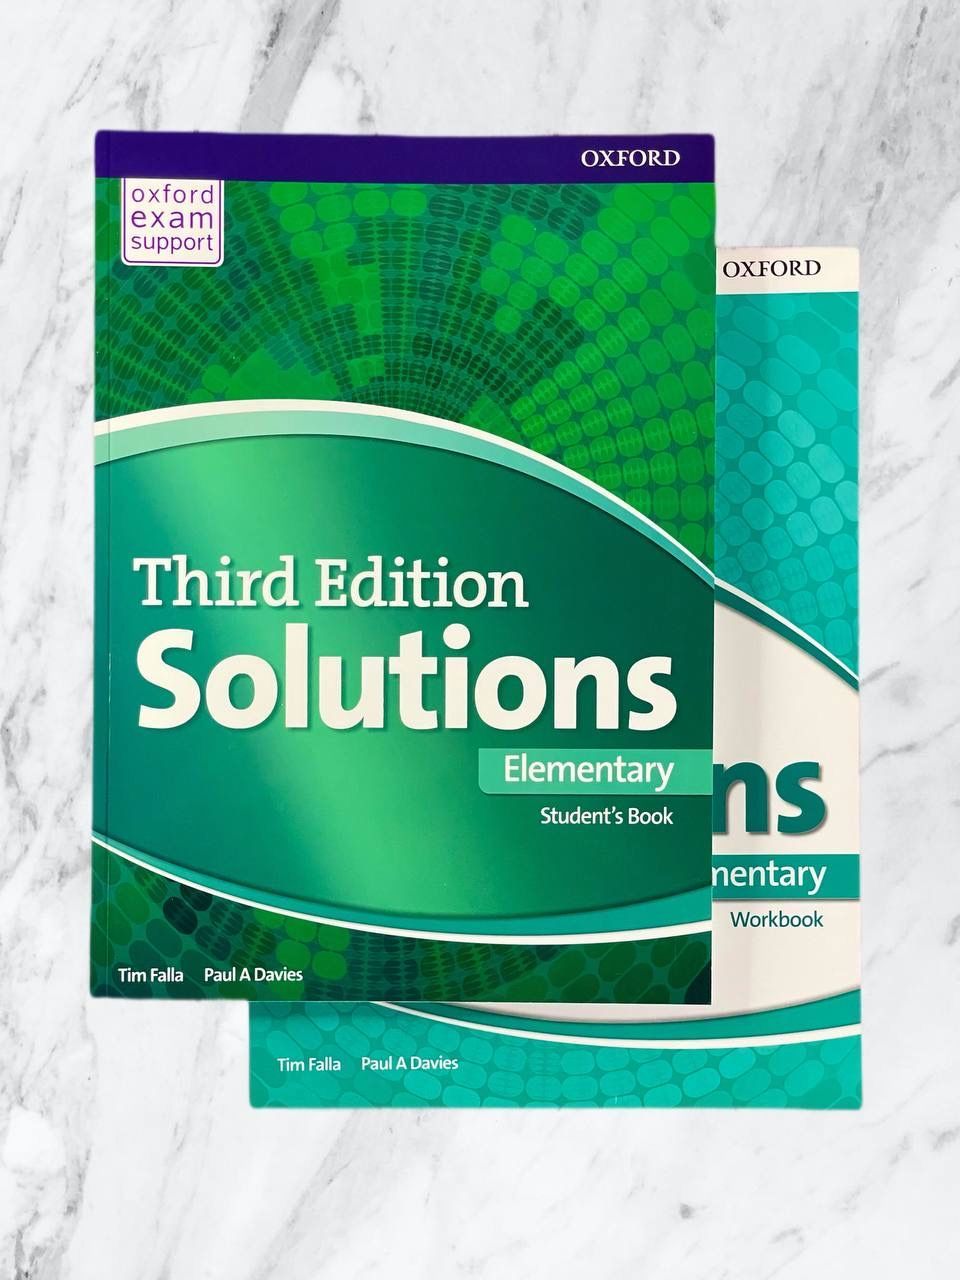 Solutions elementary workbook 5 класс. Учебник solutions Elementary. Учебник Солюшенс элементари. Solutions Elementary 3rd Edition. Solutions Elementary: Workbook.